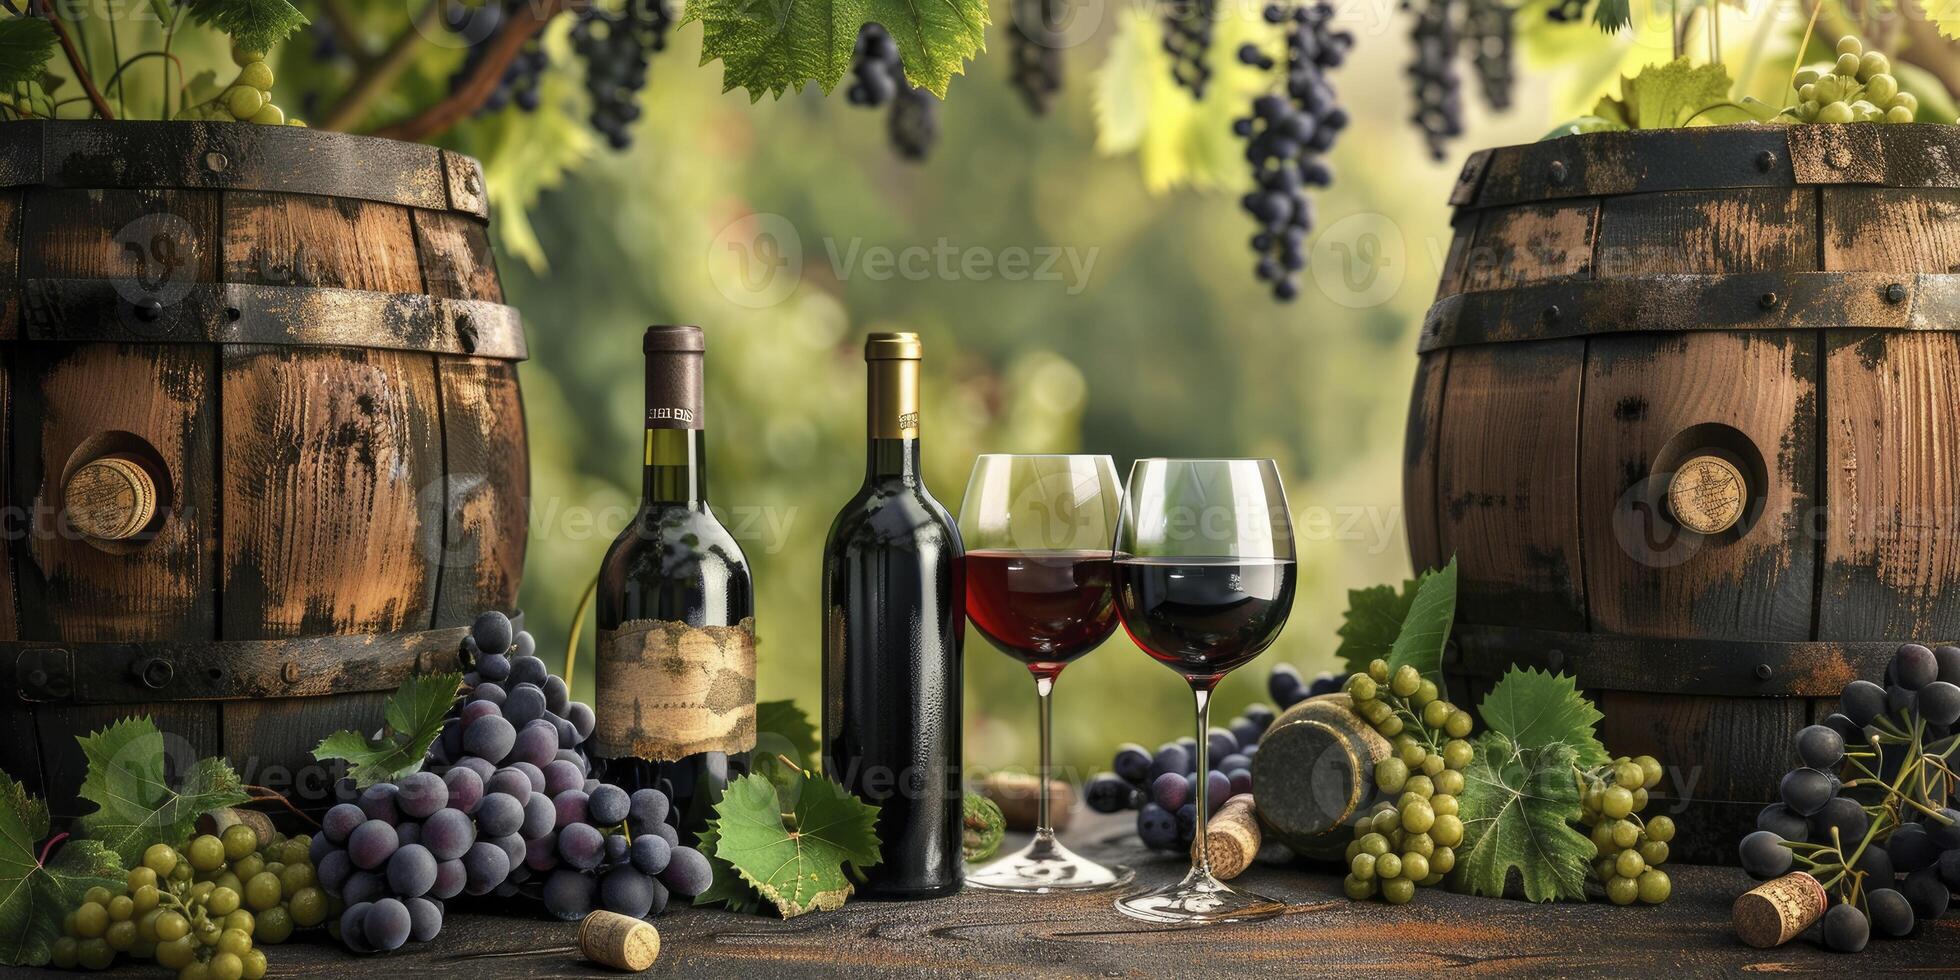 Scenic Countryside Delight, Bottles and Wine Glasses Arranged Amidst Lush Grape Vines and Wooden Barrels, Evoking the Essence of Wine Country Tranquility. photo